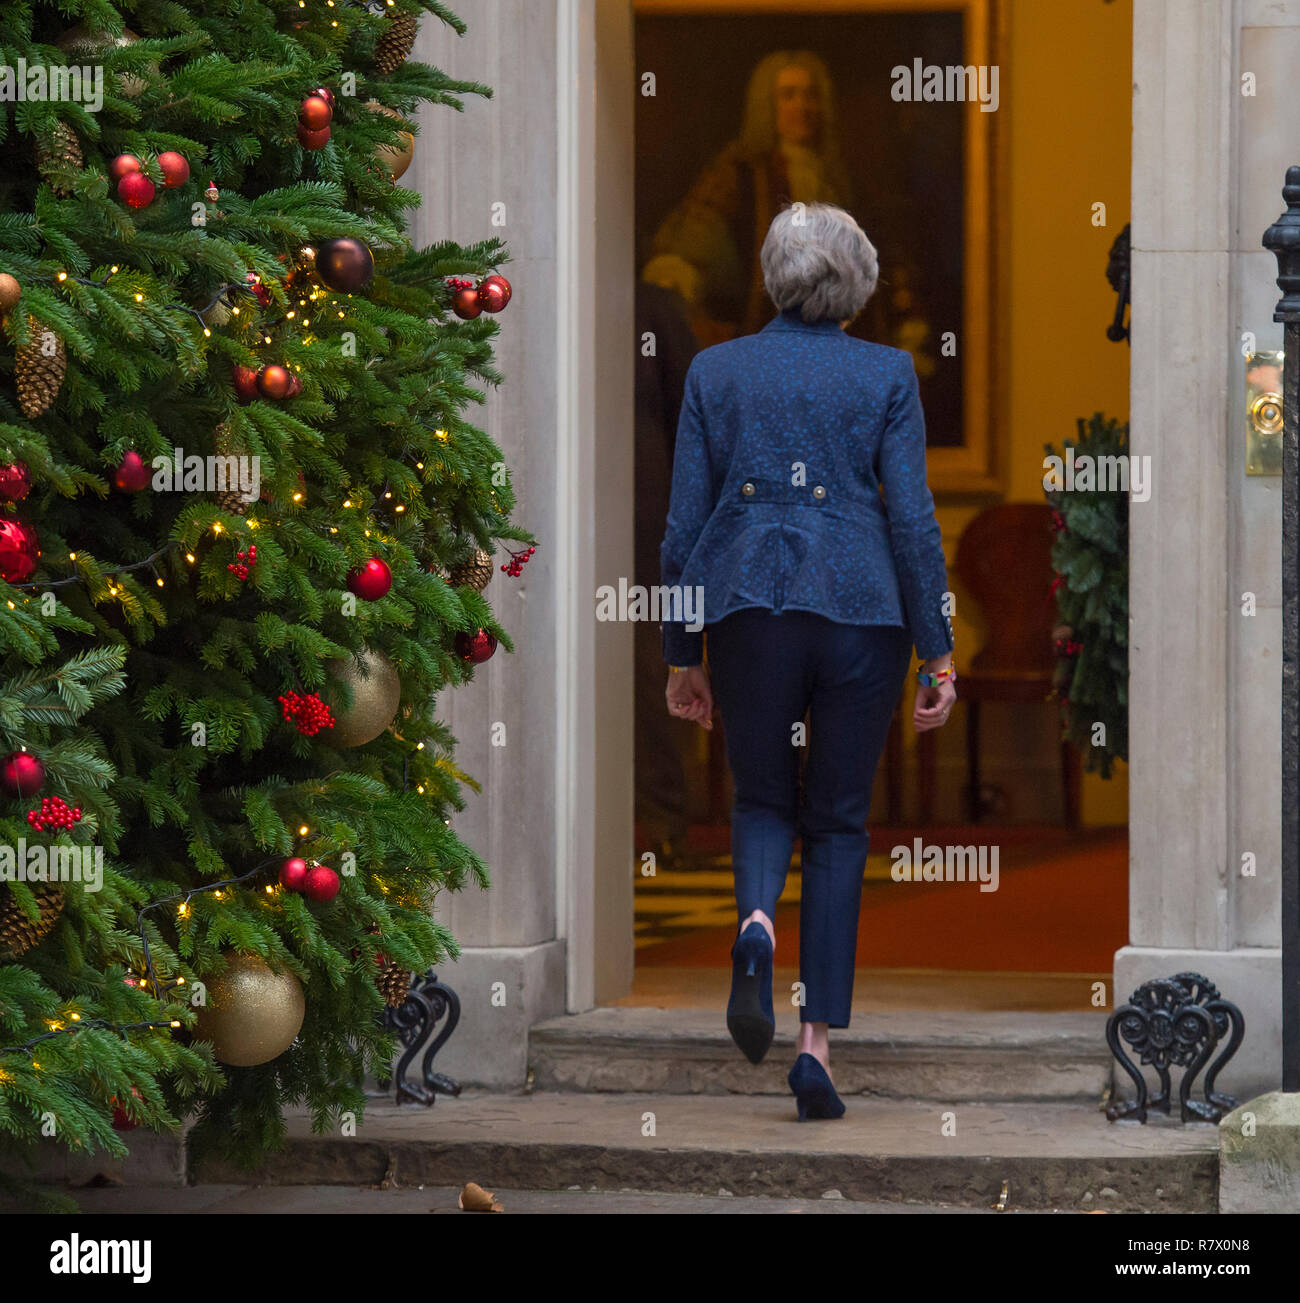 10 Downing Street, London, UK. 12 December, 2018. British Prime Minister Theresa May enters No. 10 after announcing that a vote of no confidence has been sparked and that she will fight the challenge to her leadership after 48 letters were received by the Conservative 1922 Committee. The PM won the ballot on her leadership by 200 votes to 117 on Wednesday evening. Credit: Malcolm Park/Alamy Live News. Stock Photo